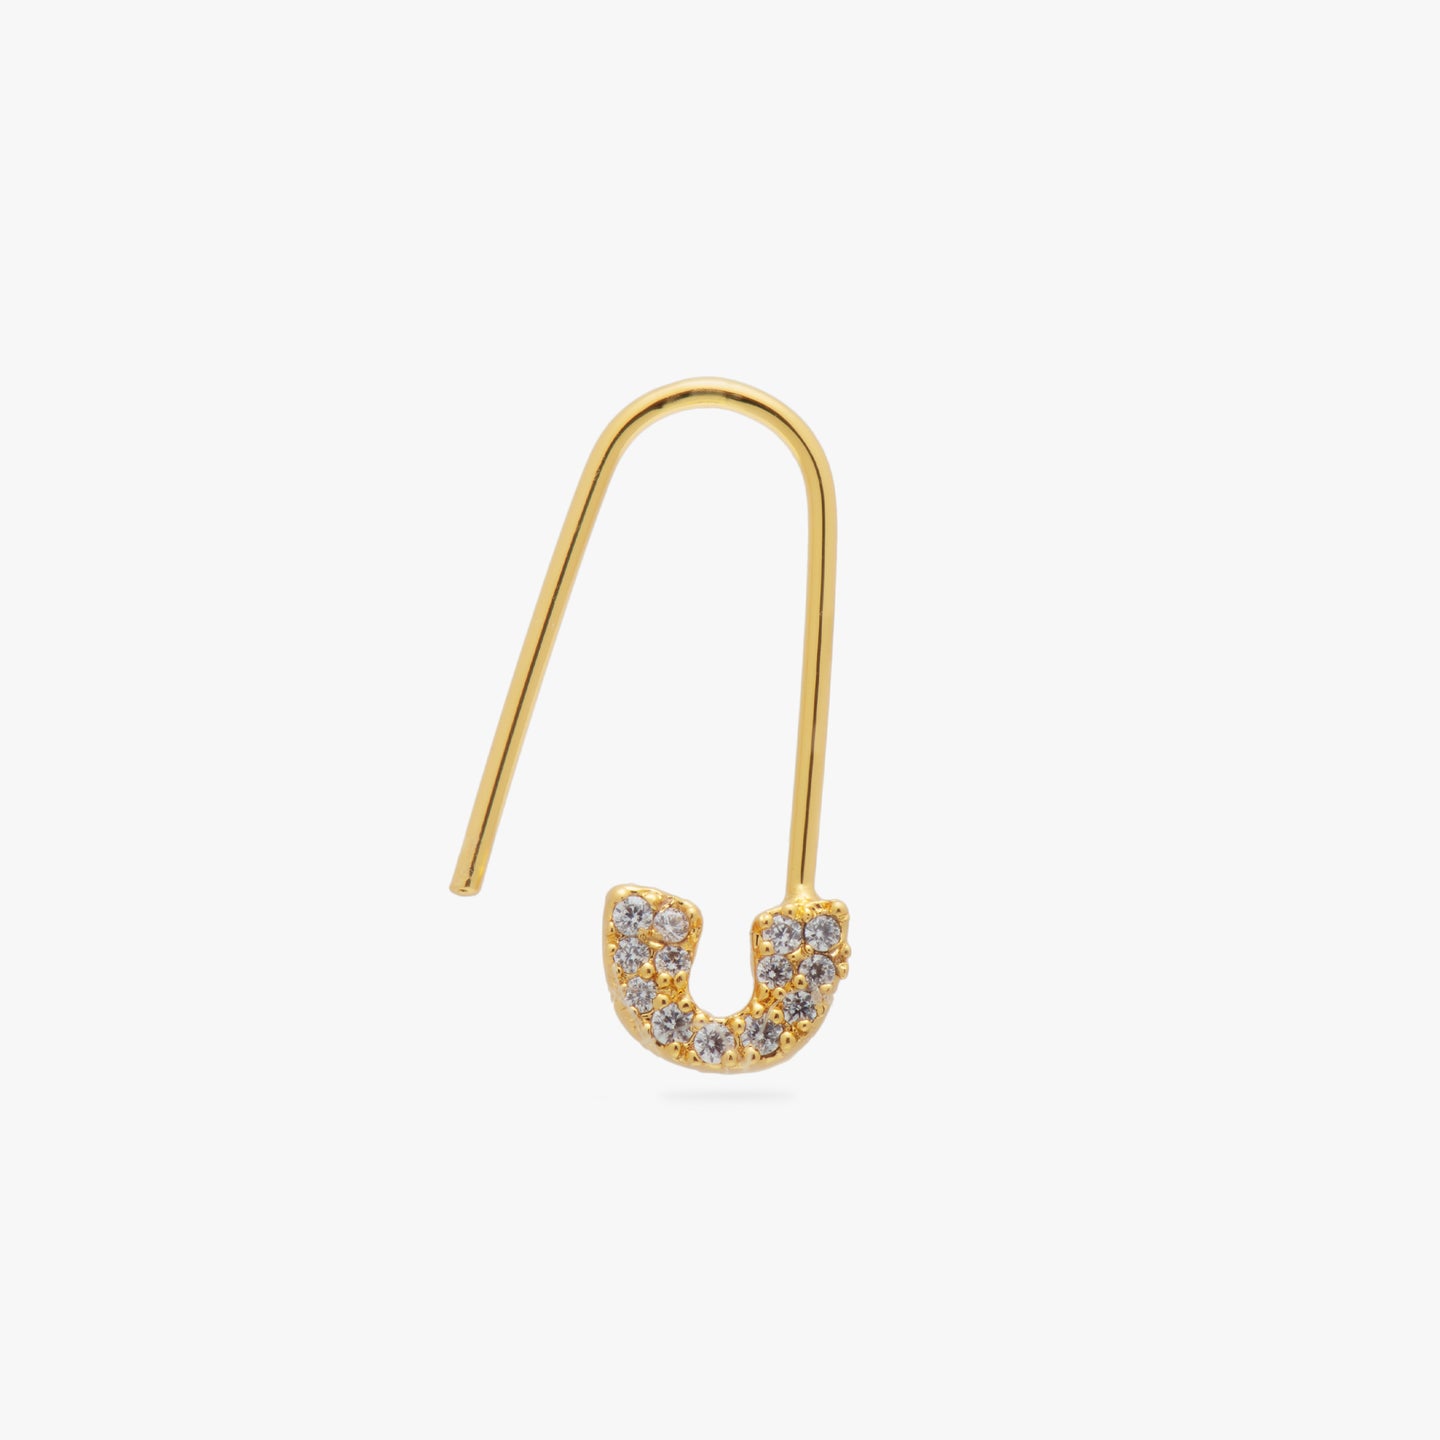 A gold/clear pave safety pin shaped earring color:null|gold/clear